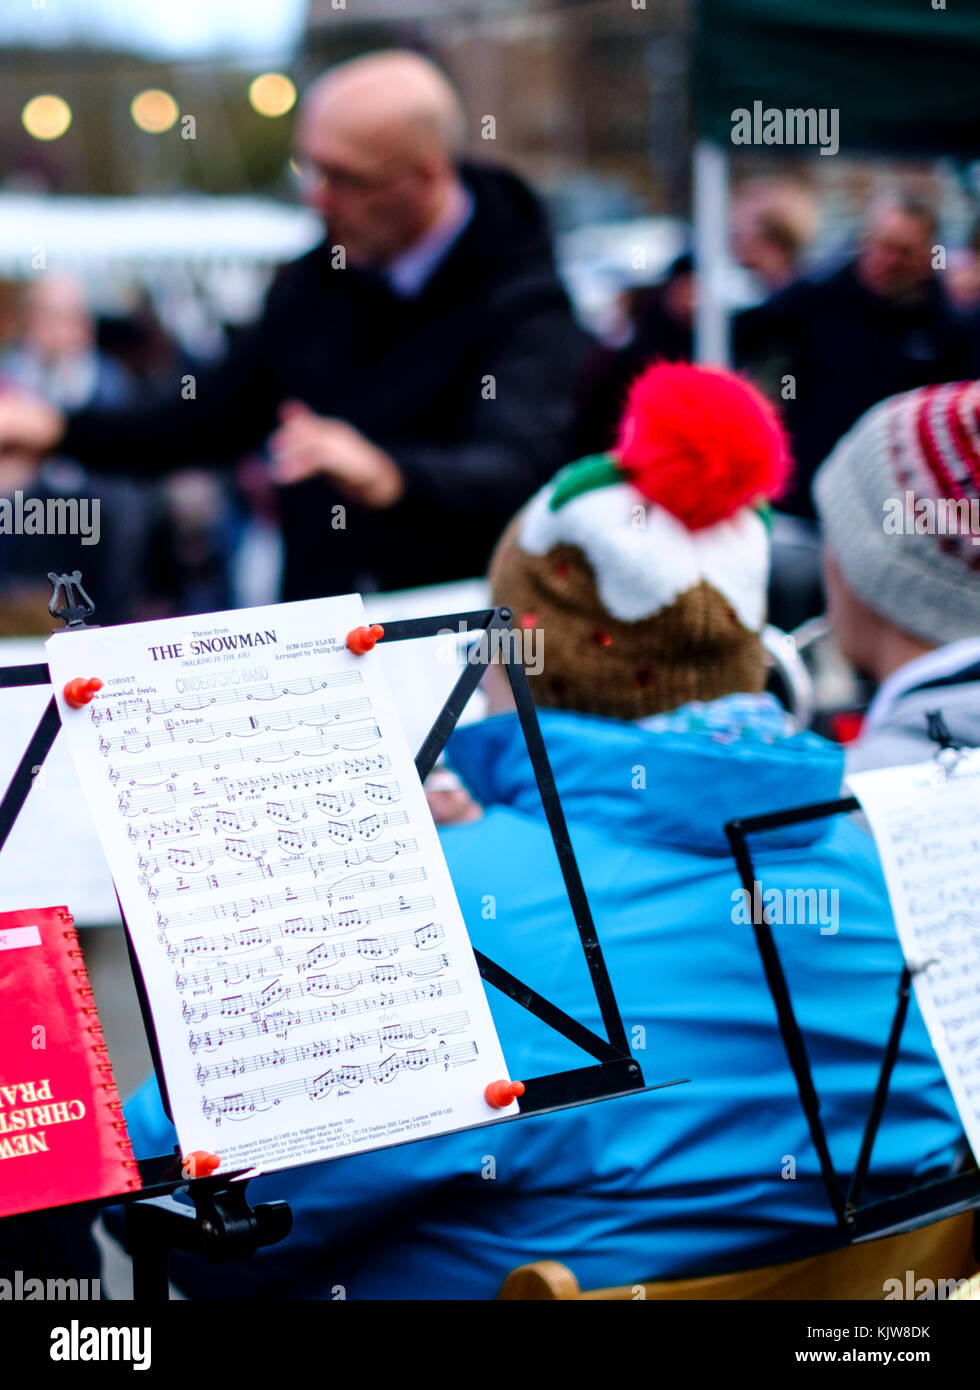 Gloucestershire, UK. 26th Nov, 2017. 26th November 2017. Visitors attend the victorian themed market at Gloucester historic docks.  Seasonal foods are available at many of the stalls. Entertainment comes from re-enactors and a band. The Cinderford Silver band from the Forest of Dean played The Snowman Stock Photo